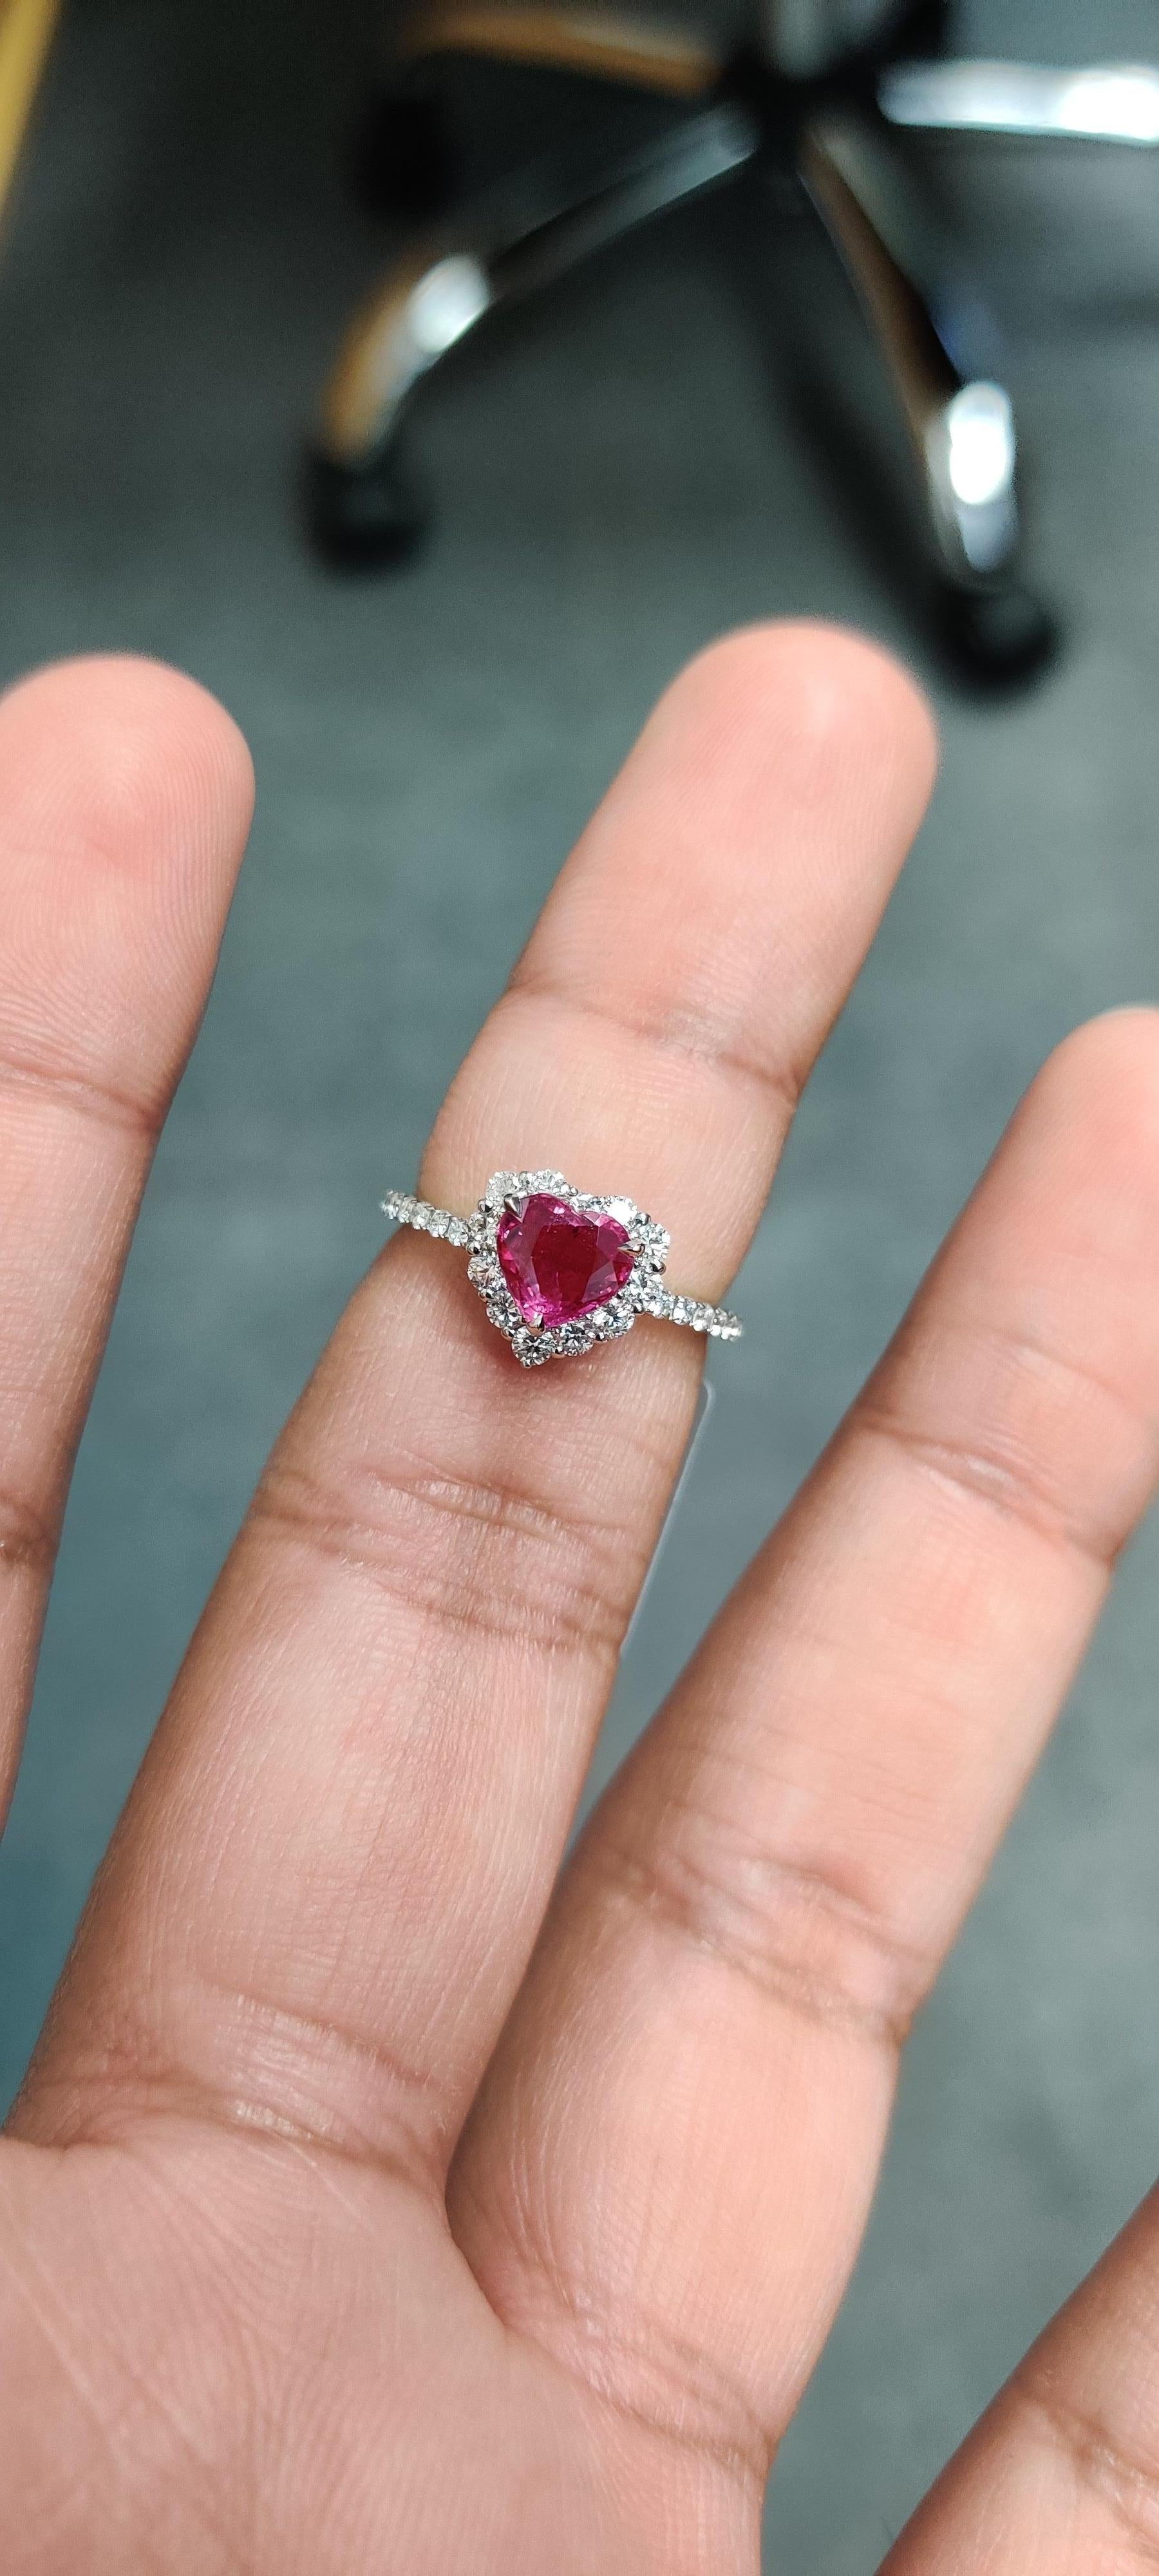 Introducing our breathtaking Heart-Shaped Ruby Ring, a true testament to love and elegance. This exquisite piece features a dazzling 1.23 carat heart-shaped ruby, symbolizing passion and romance, surrounded by 0.54 carats of shimmering diamonds,